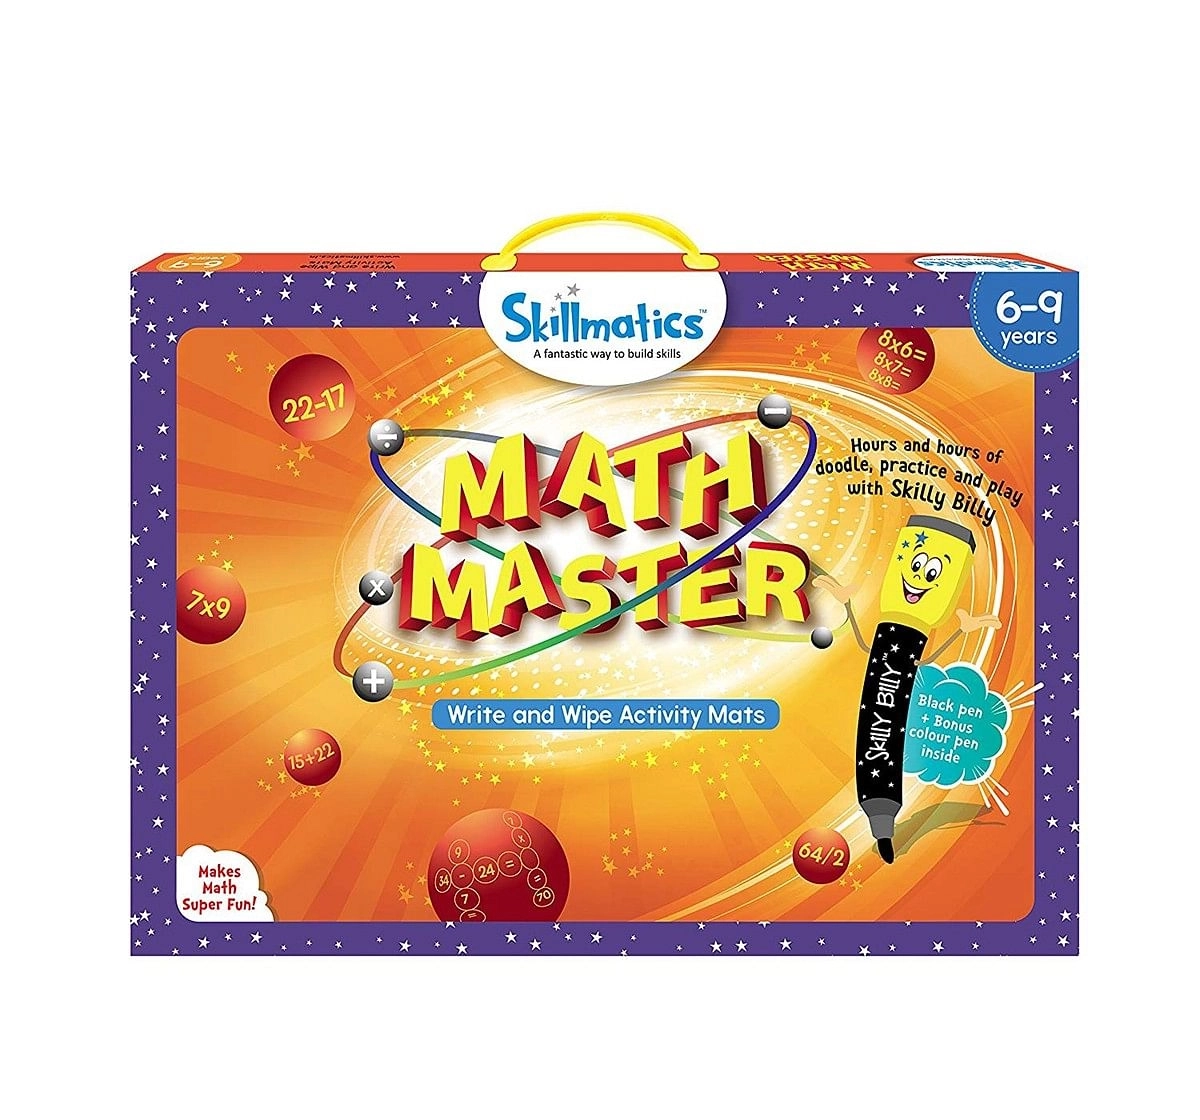  Skillmatics Educational Game : Math Master Games for Kids age 6Y+ 